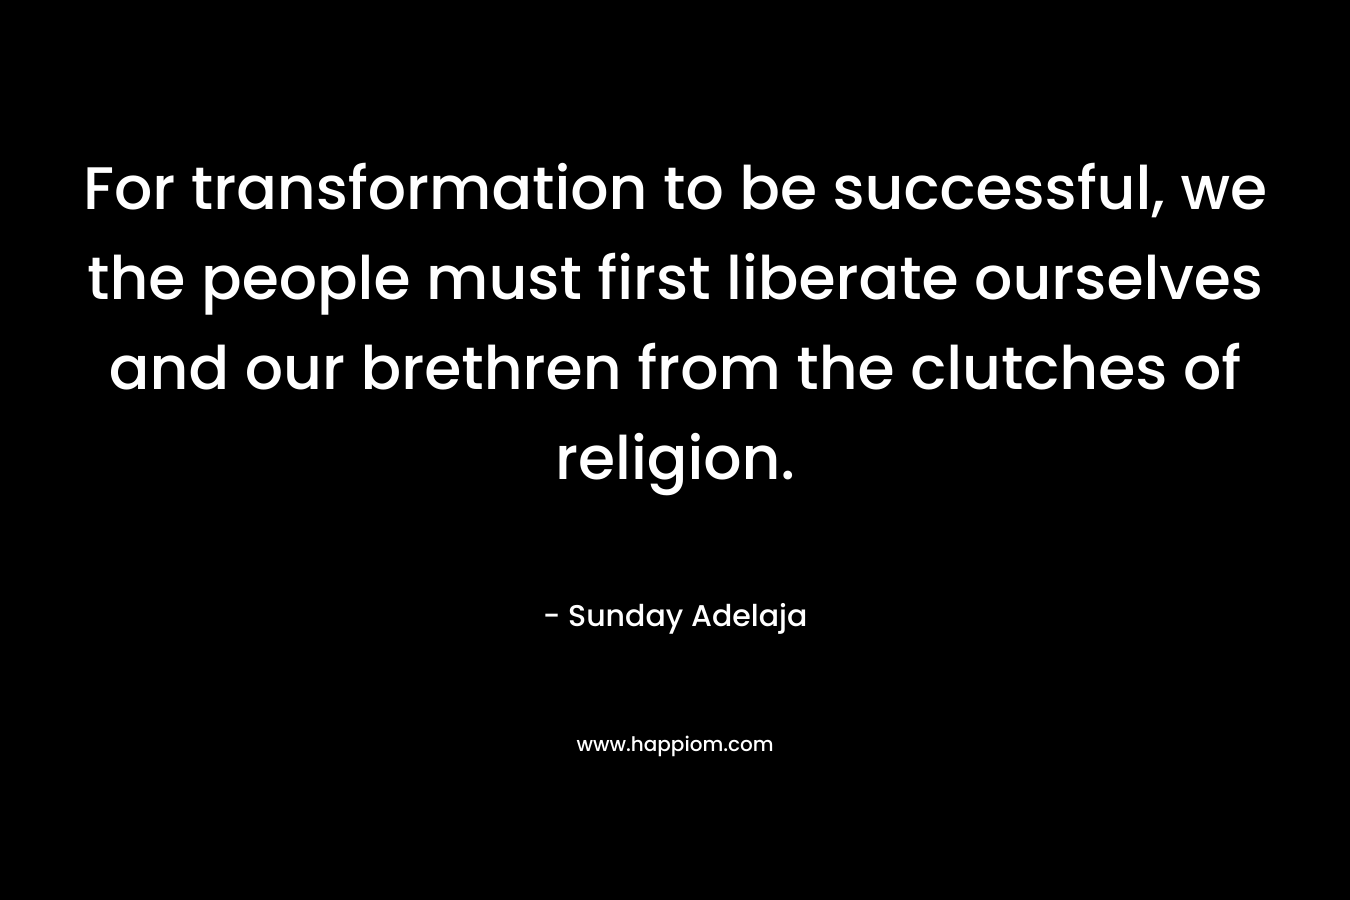 For transformation to be successful, we the people must first liberate ourselves and our brethren from the clutches of religion. – Sunday Adelaja